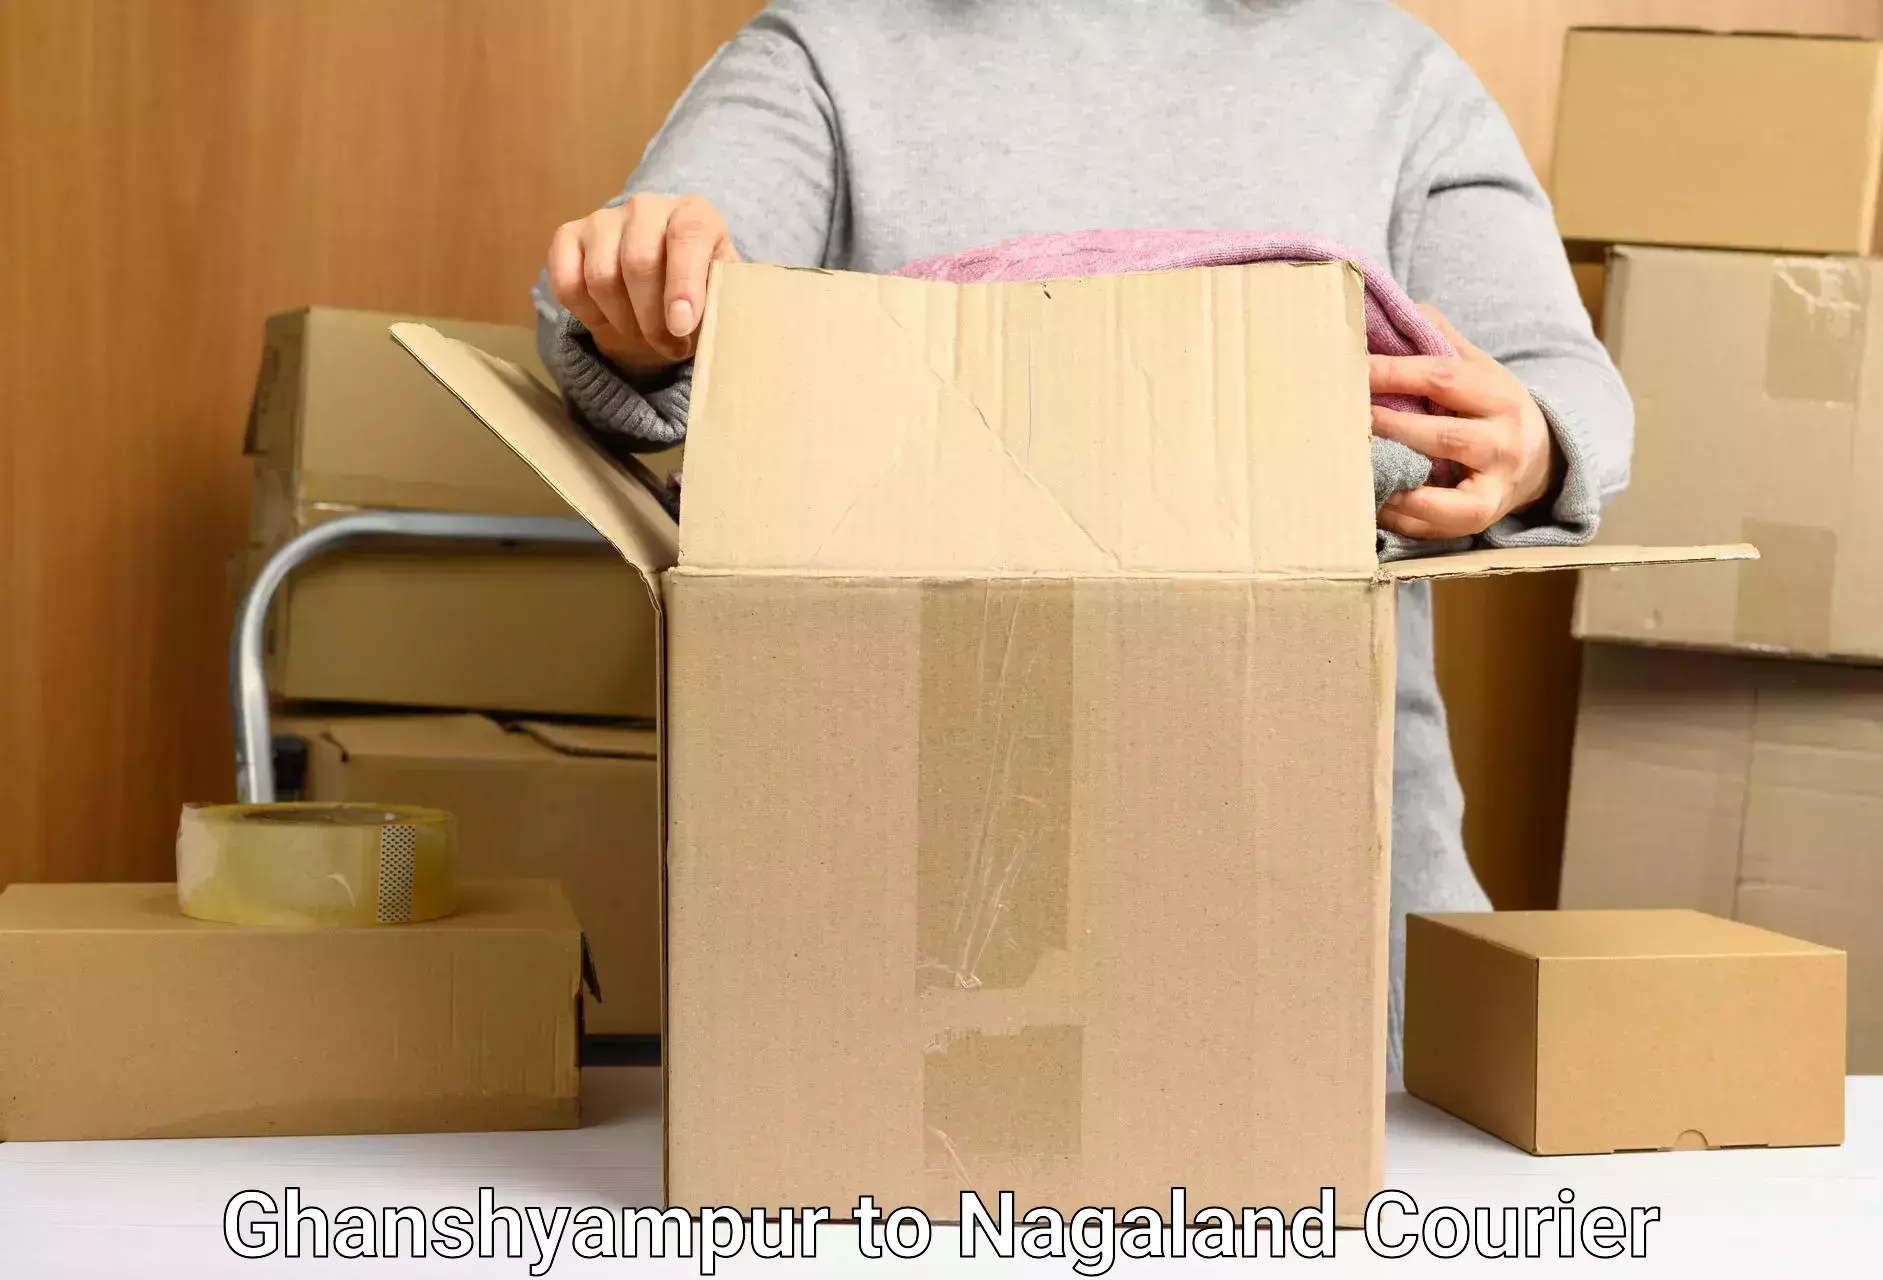 Professional parcel services in Ghanshyampur to Nagaland